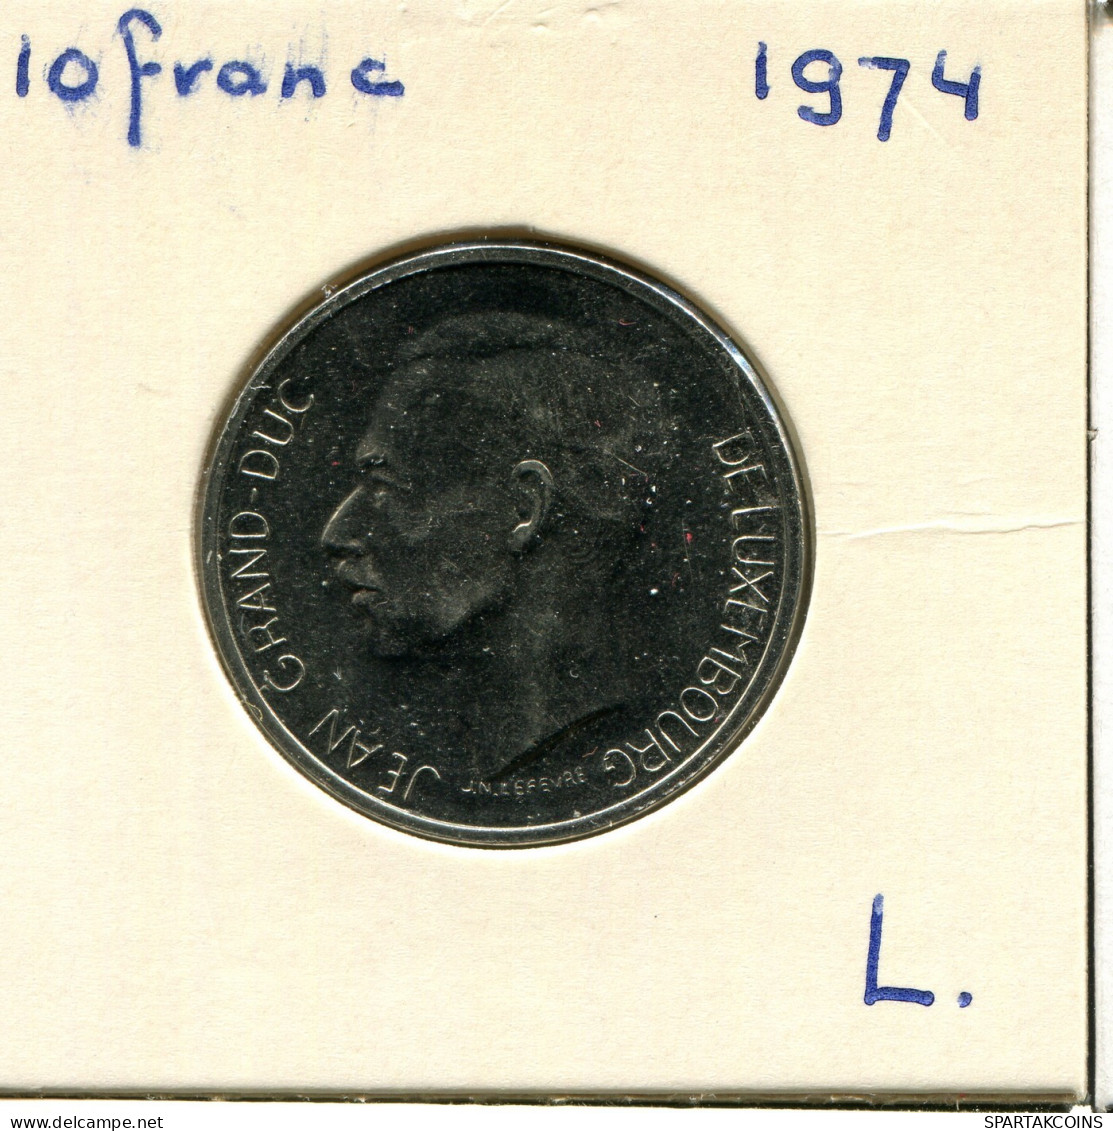 10 FRANCS 1974 LUXEMBOURG Pièce #AW832.F.A - Luxemburg